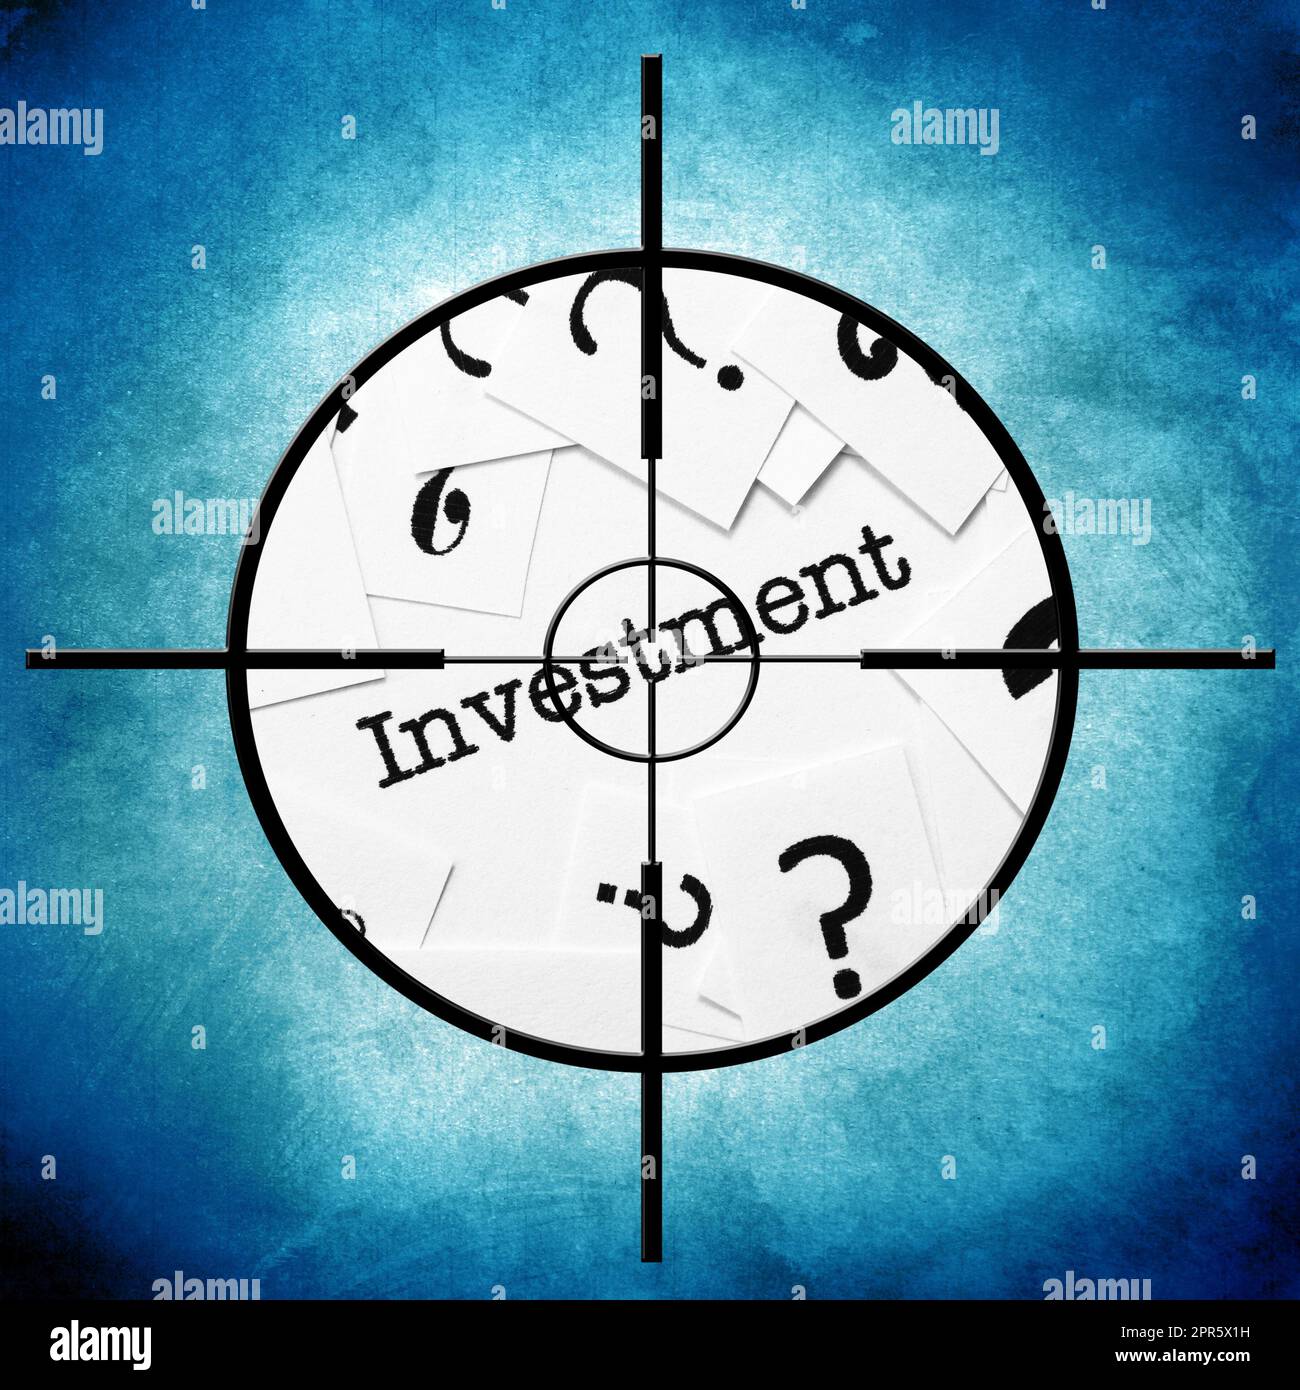 Investment target Stock Photo